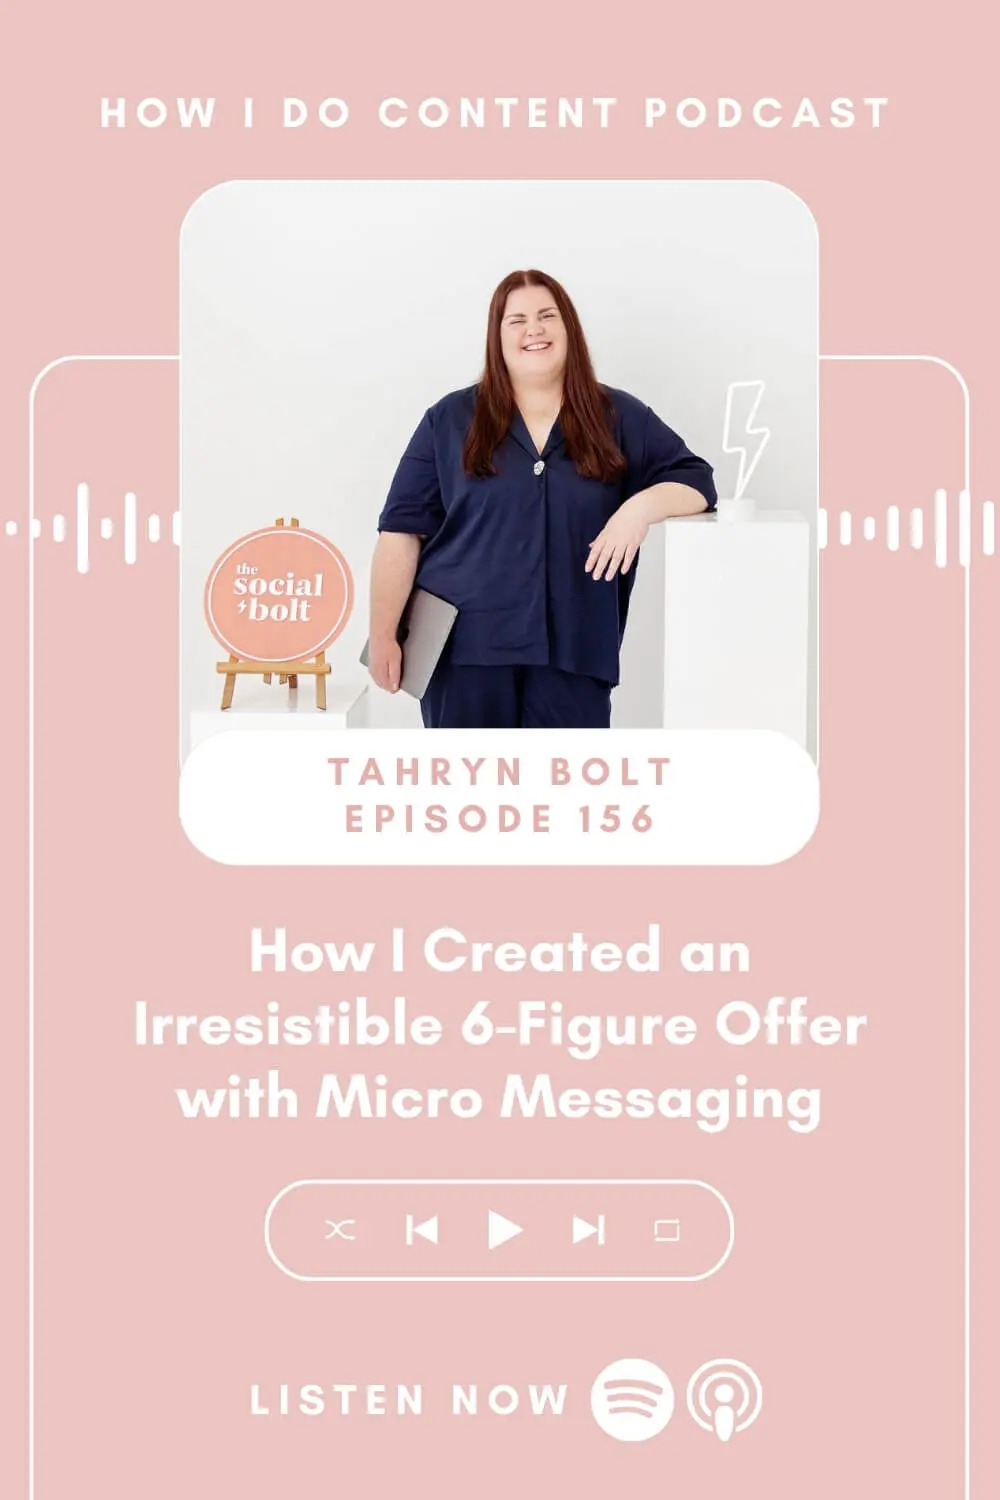 How I Created an Irresistible 6-Figure Offer with Micro Messaging